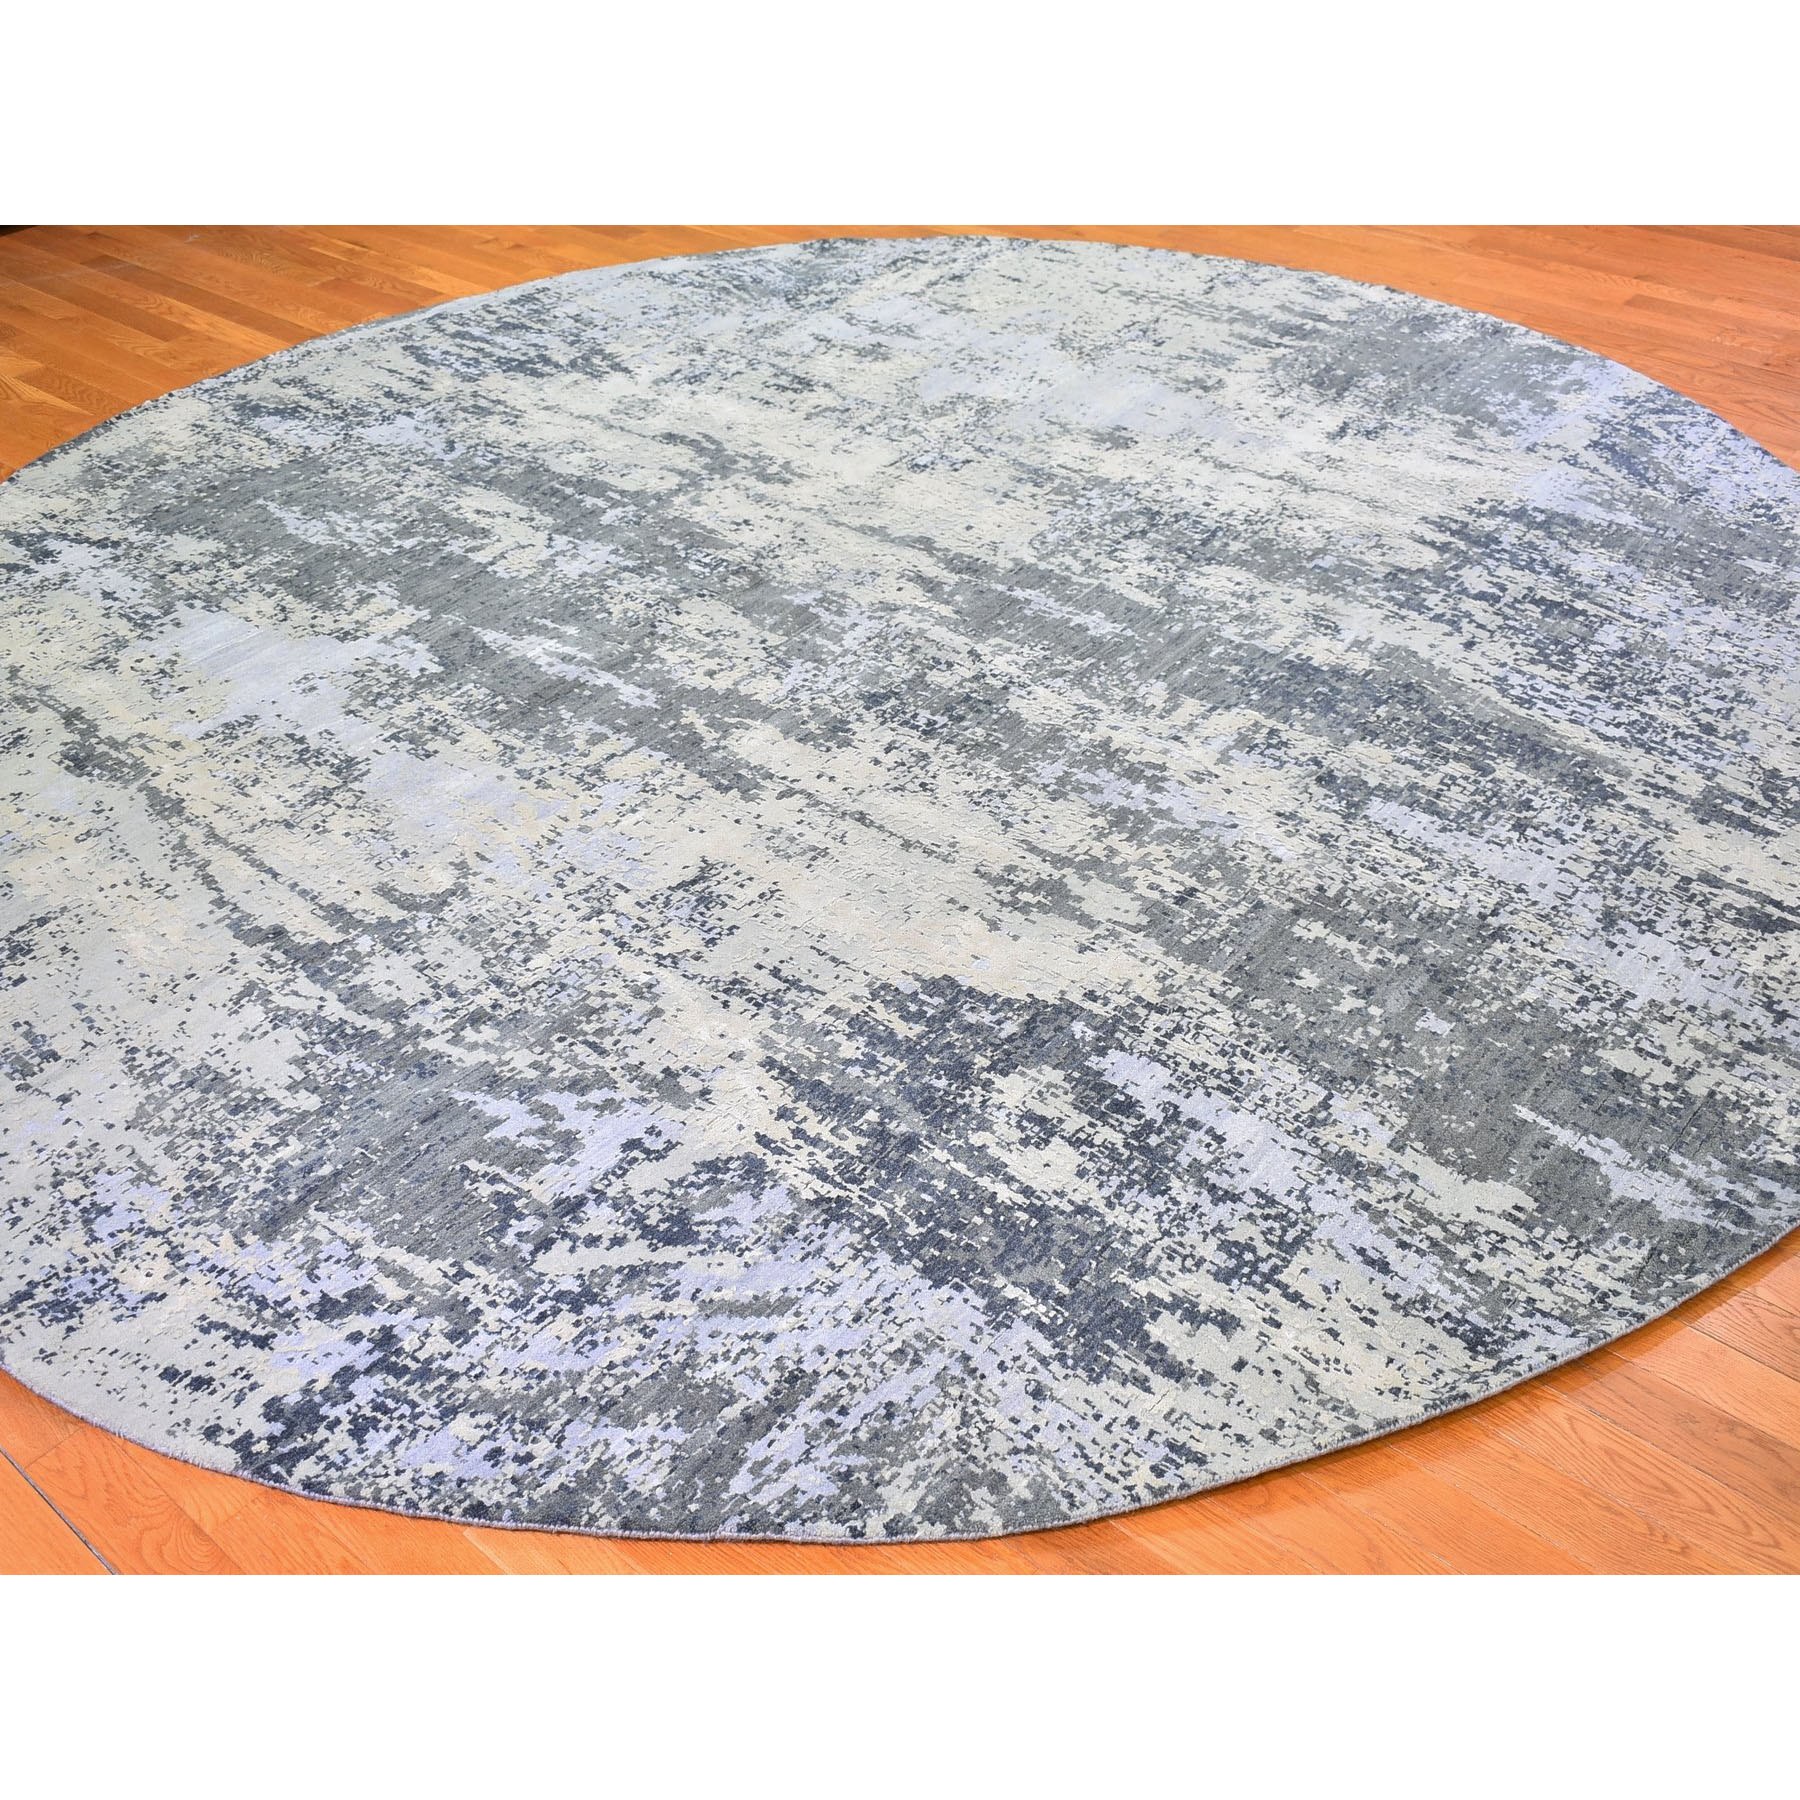 12'1"x12'1" Abstract Design Wool and Silk Round Denser Weave Charcoal Gray Persian Knot Hand Woven Oriental Rug 